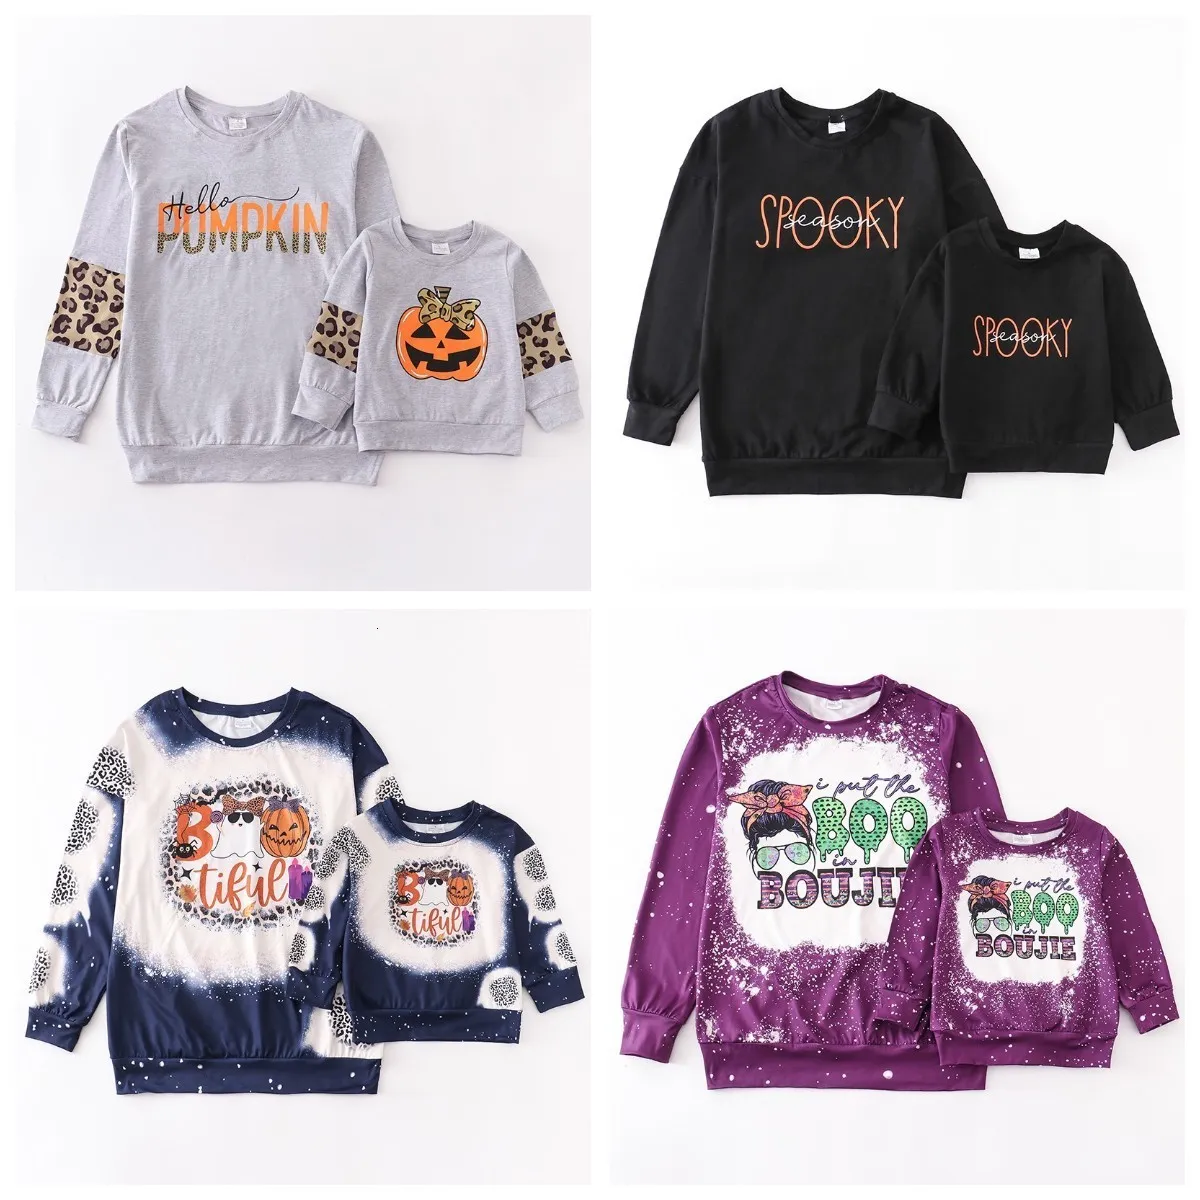 Family Matching Outfits Girlymax Fall Halloween Baby Girls Mommy me Leopard Pumpkin BOO Spooky Boutique Top Tshirts Kids Clothing Long Sleeve 230223